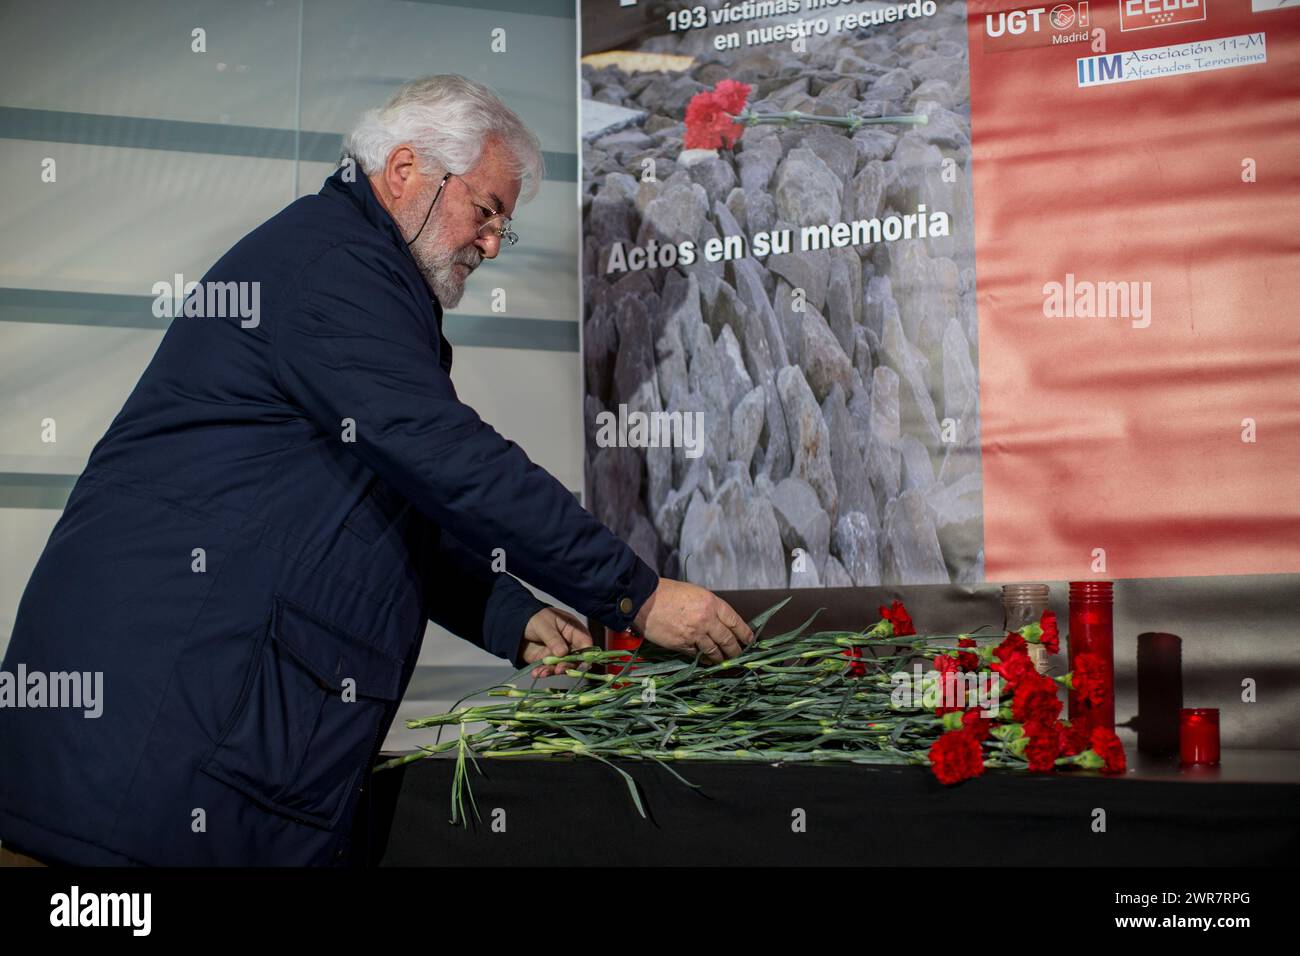 Madrid, Spain. 11th Mar, 2024. A man places a red carnation on an altar in front of a memorial to the victims of the train bombing inside the Atocha train station in Madrid, during the 20th anniversary of the terrorist attack. On March 11, 2004, several terrorist attacks occurred in Madrid, leaving 193 people dead and around 2,000 injured. Credit: SOPA Images Limited/Alamy Live News Stock Photo